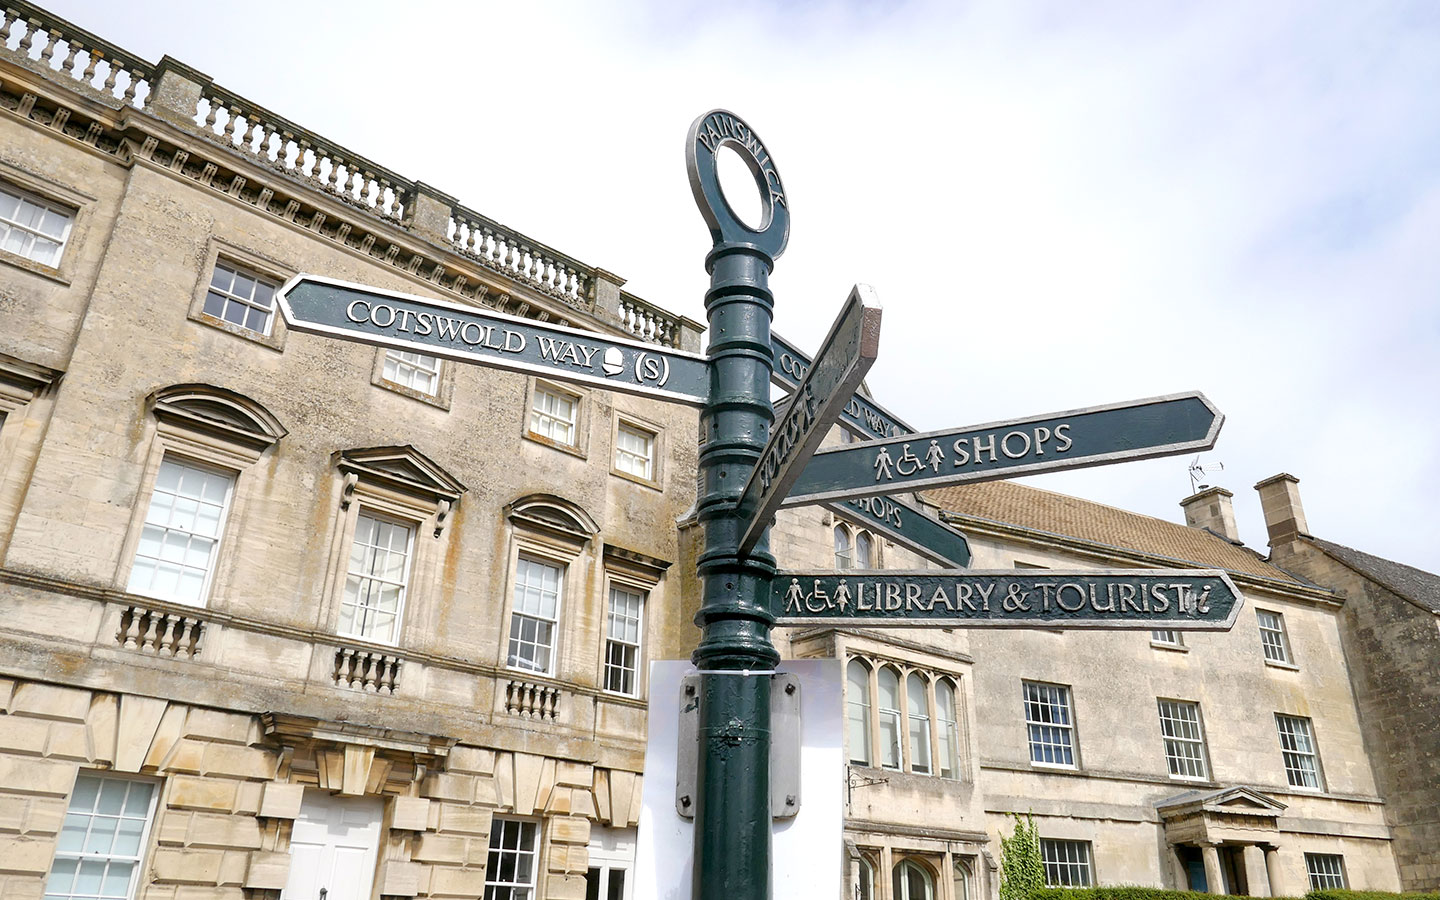 Signpost in Painswick